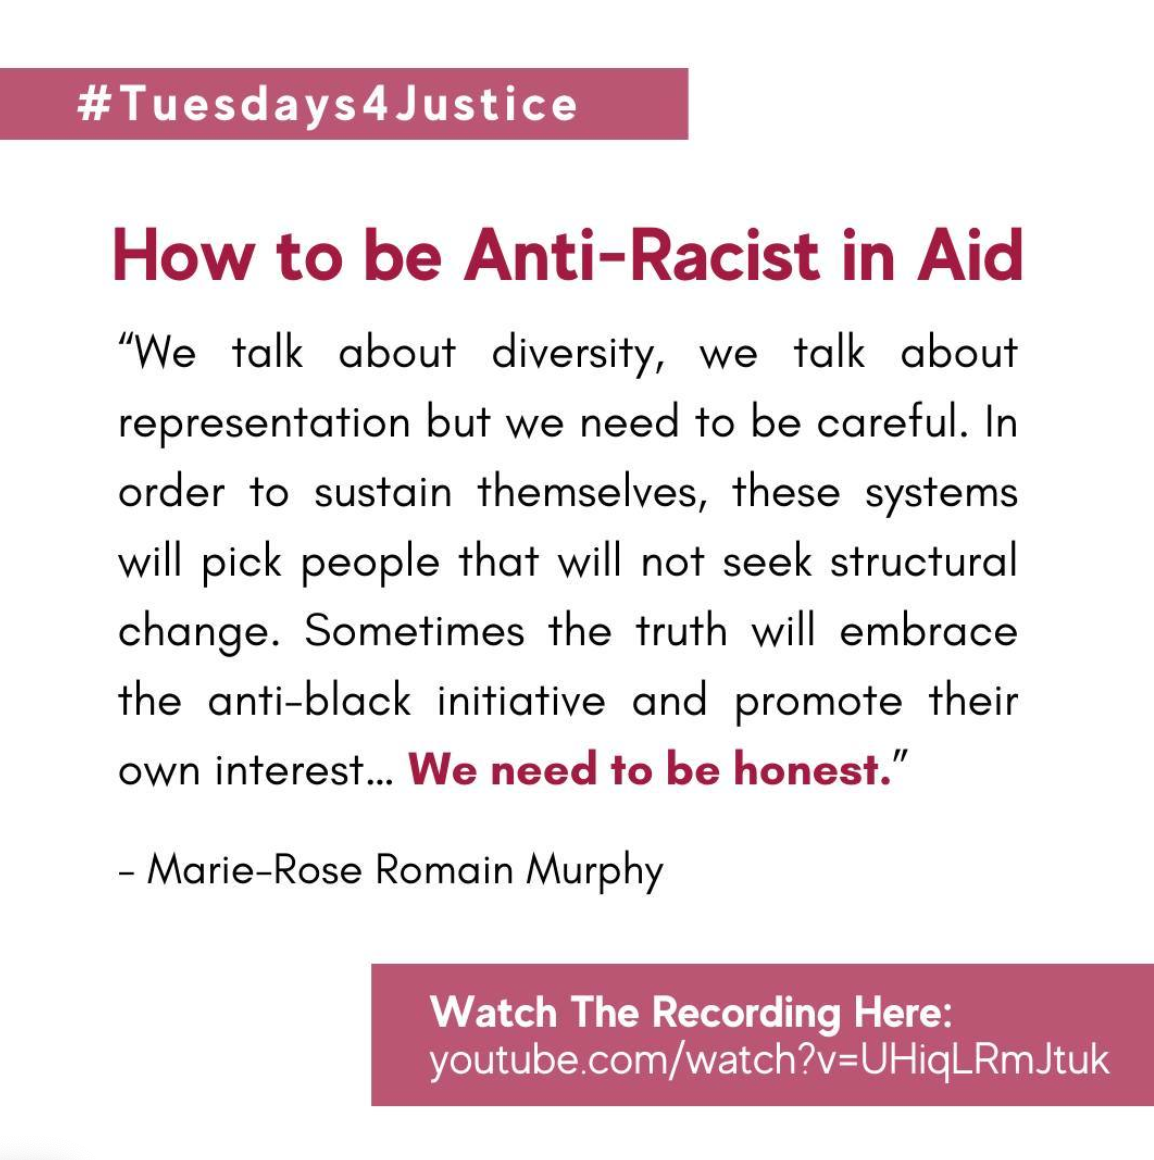 May 10 | How to be Anti-Racist in Aid